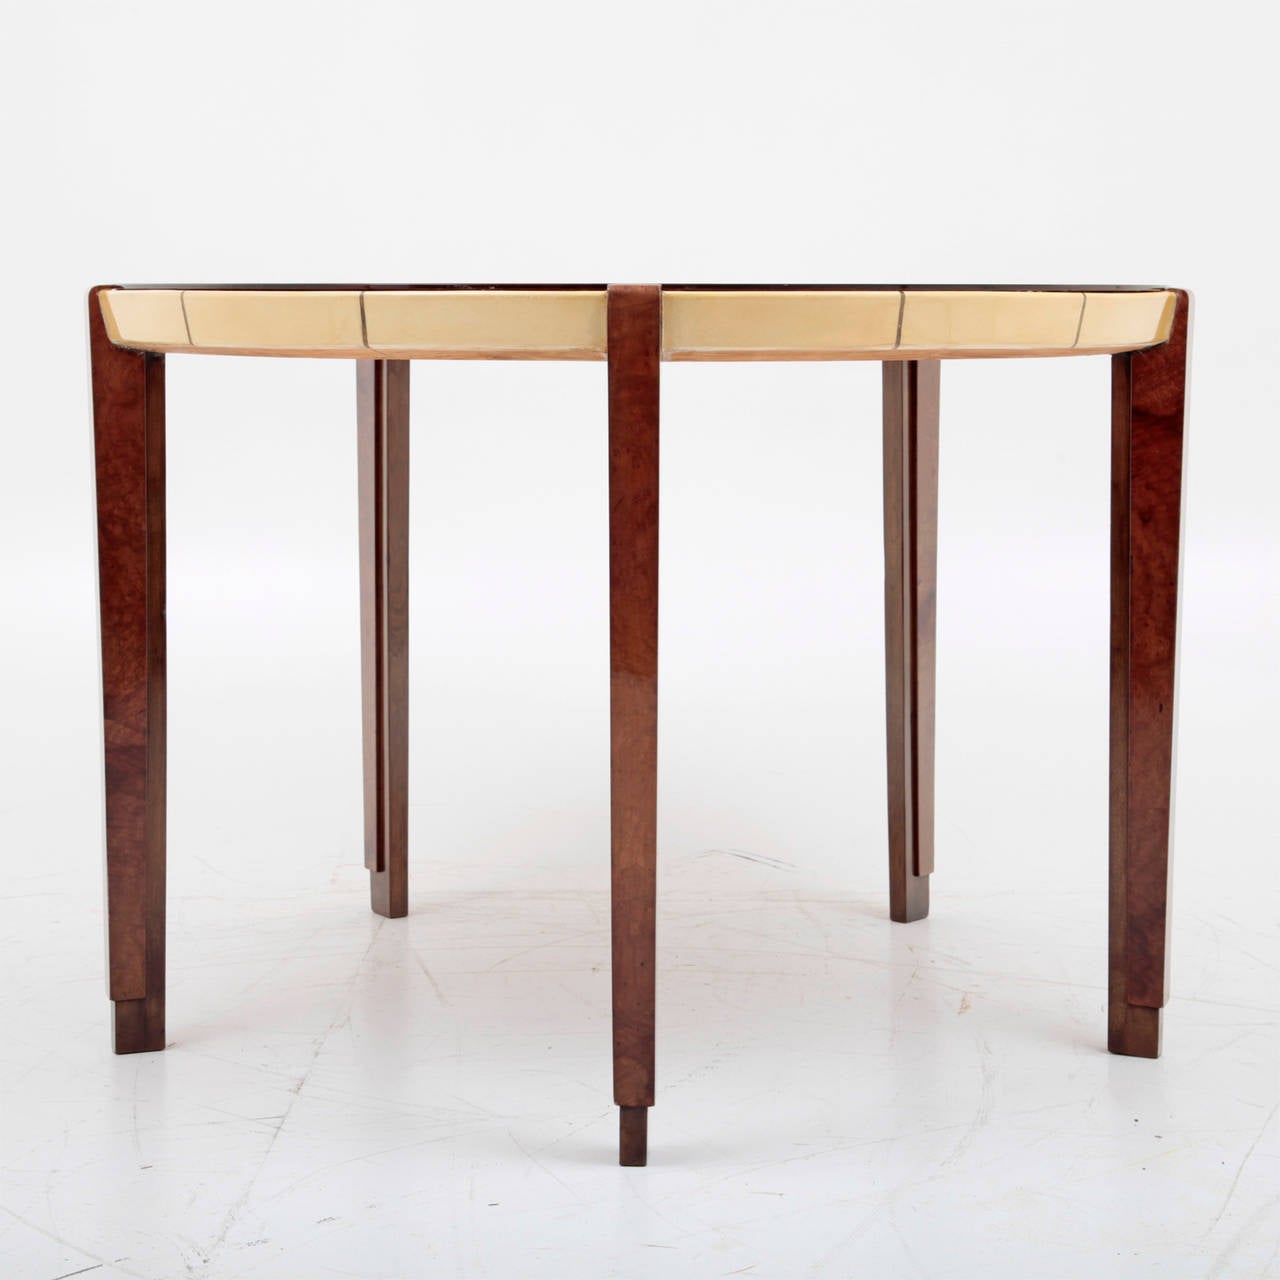 Italian Game Table by Fontana from 1941